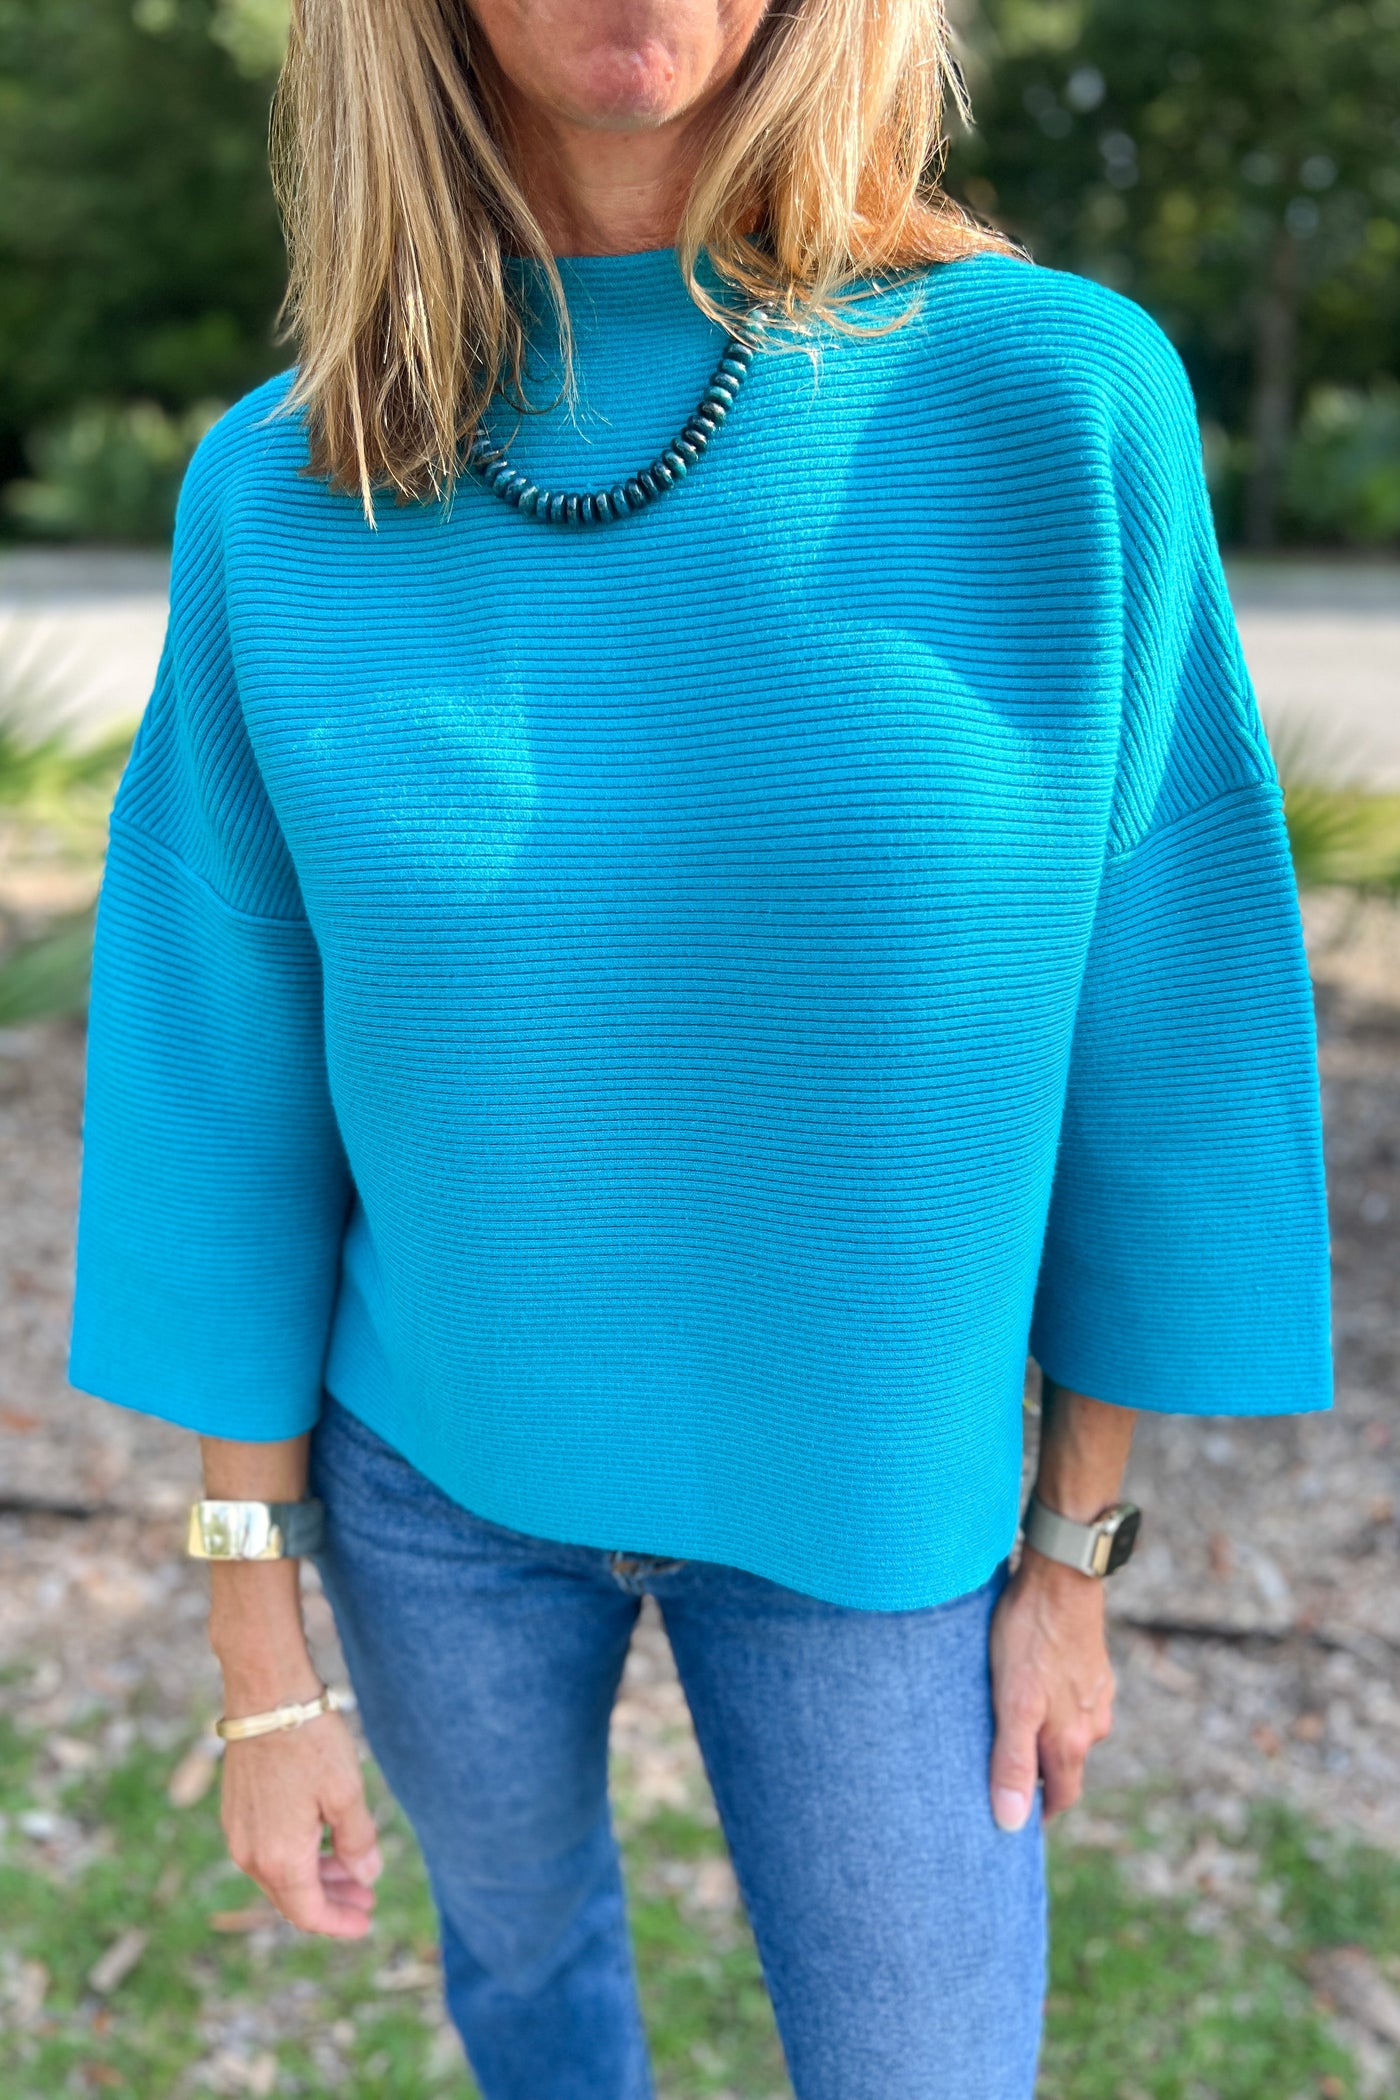 Kenly sweater, teal